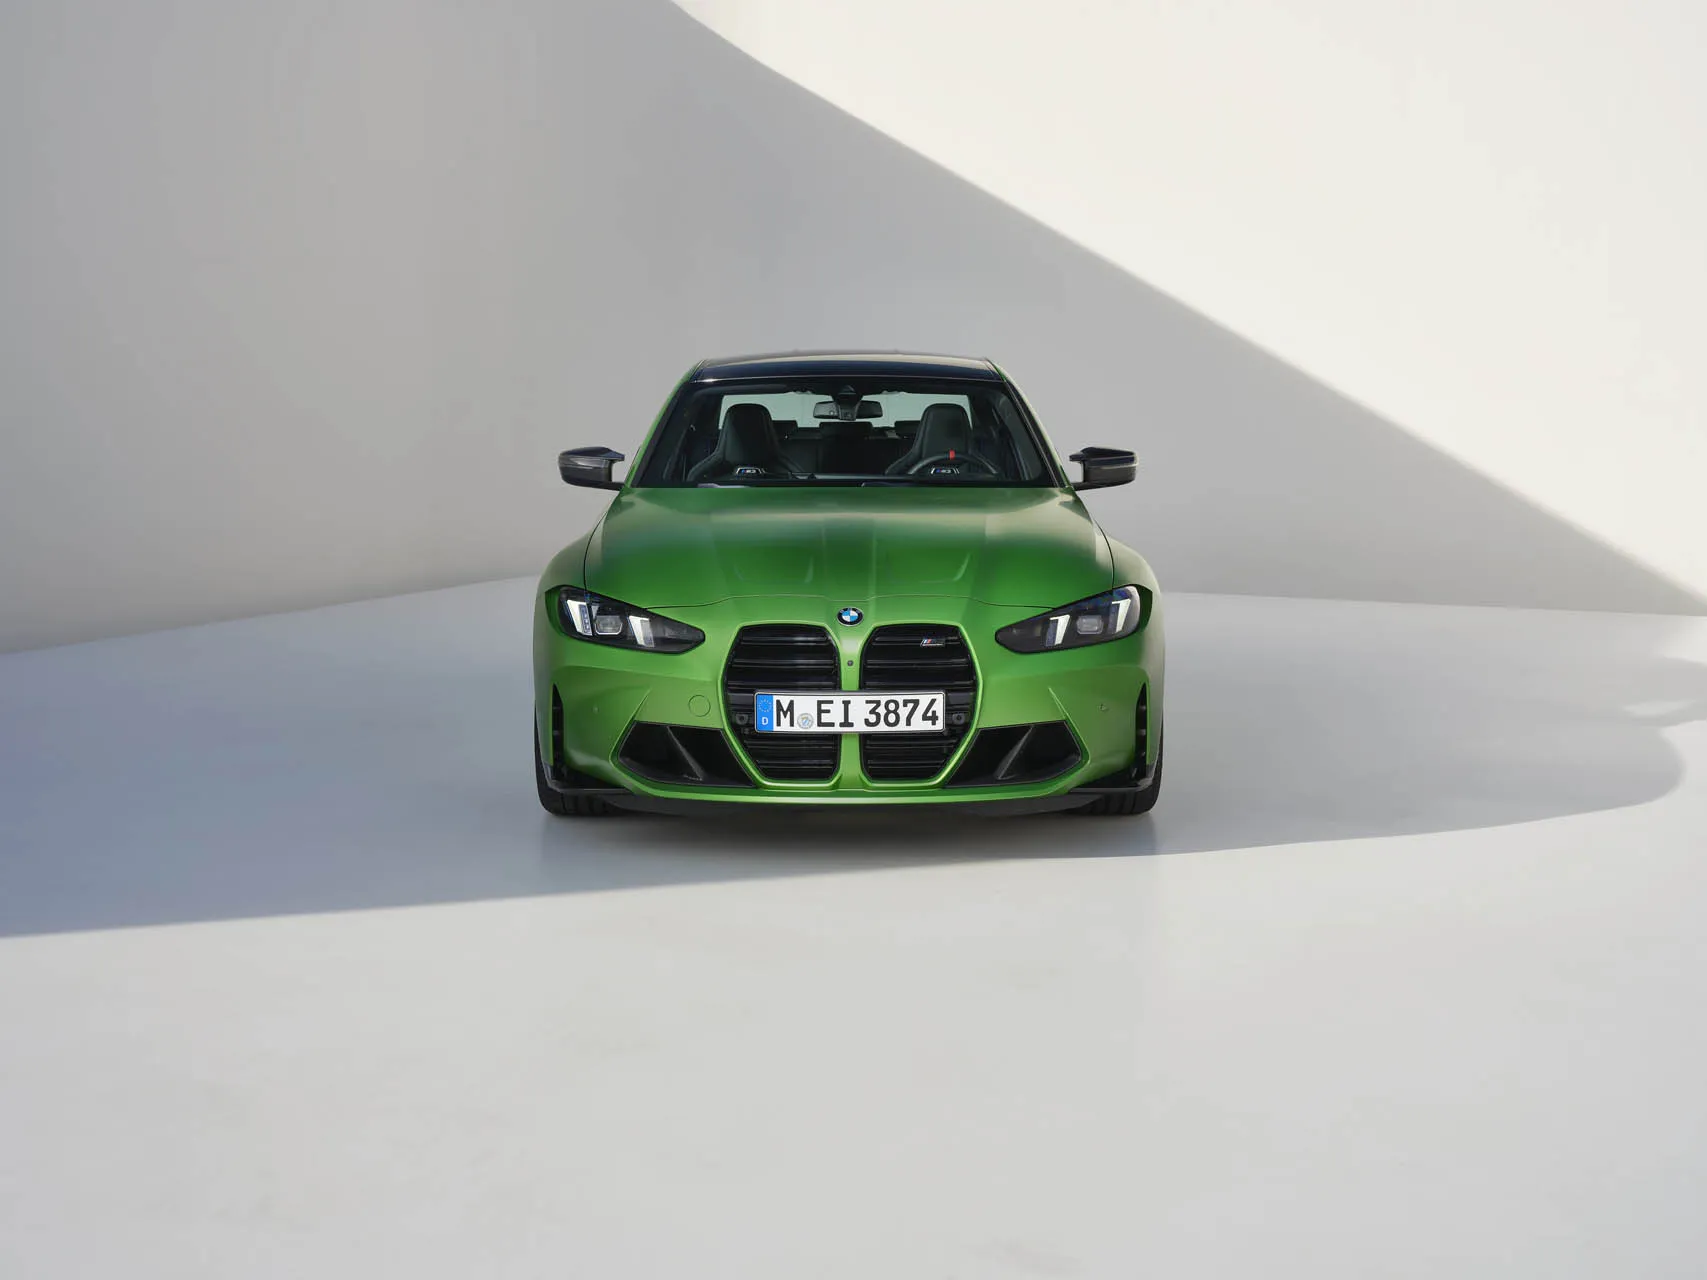 Electric BMW M3 coming to "beat everything"